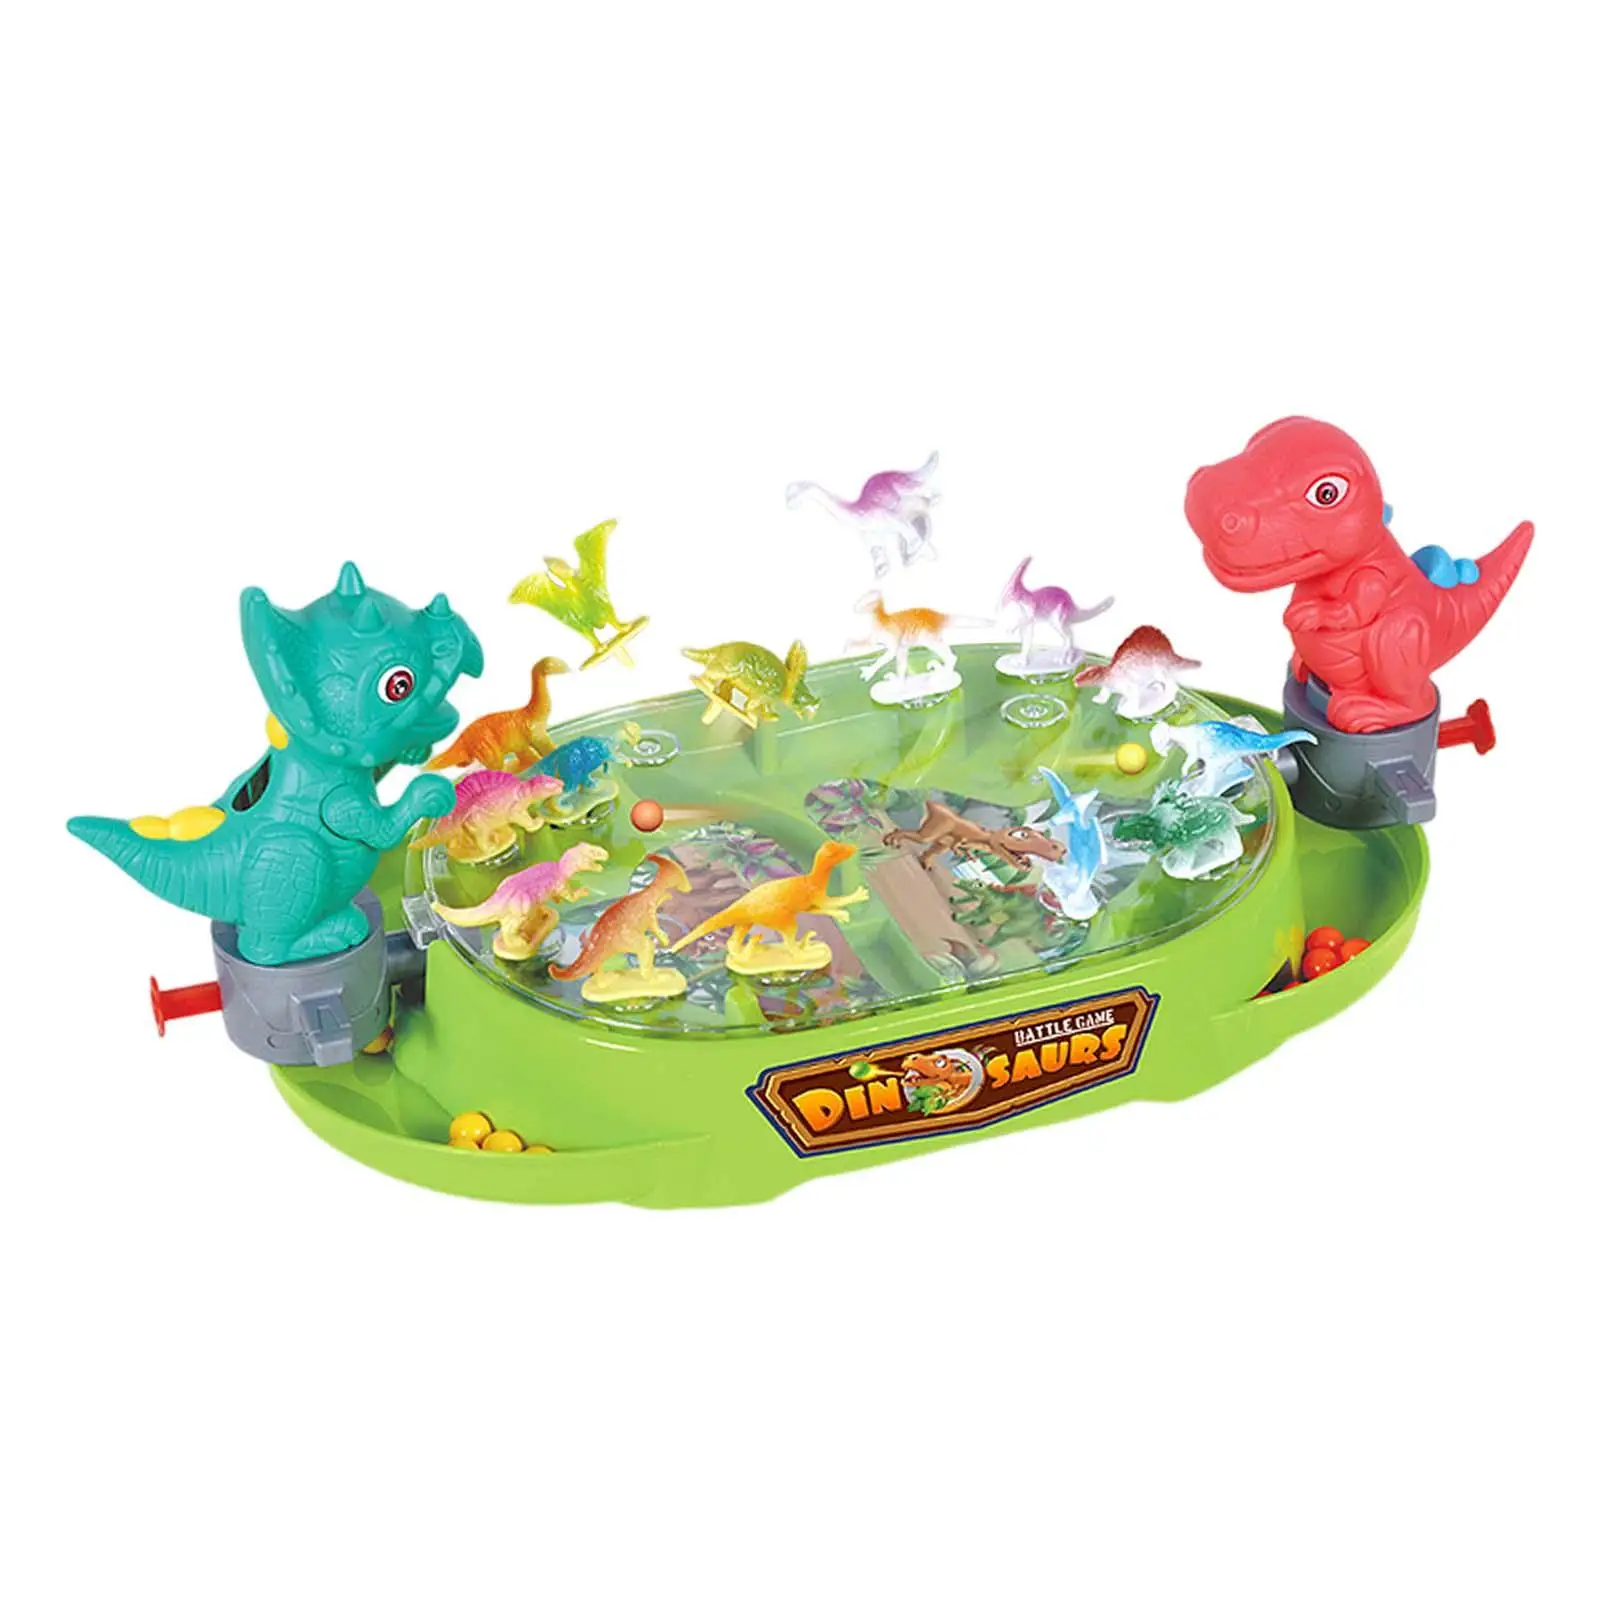 Dinosaur Board Play Double Player Dinosaurs Toys Game for Boys Gift Kids